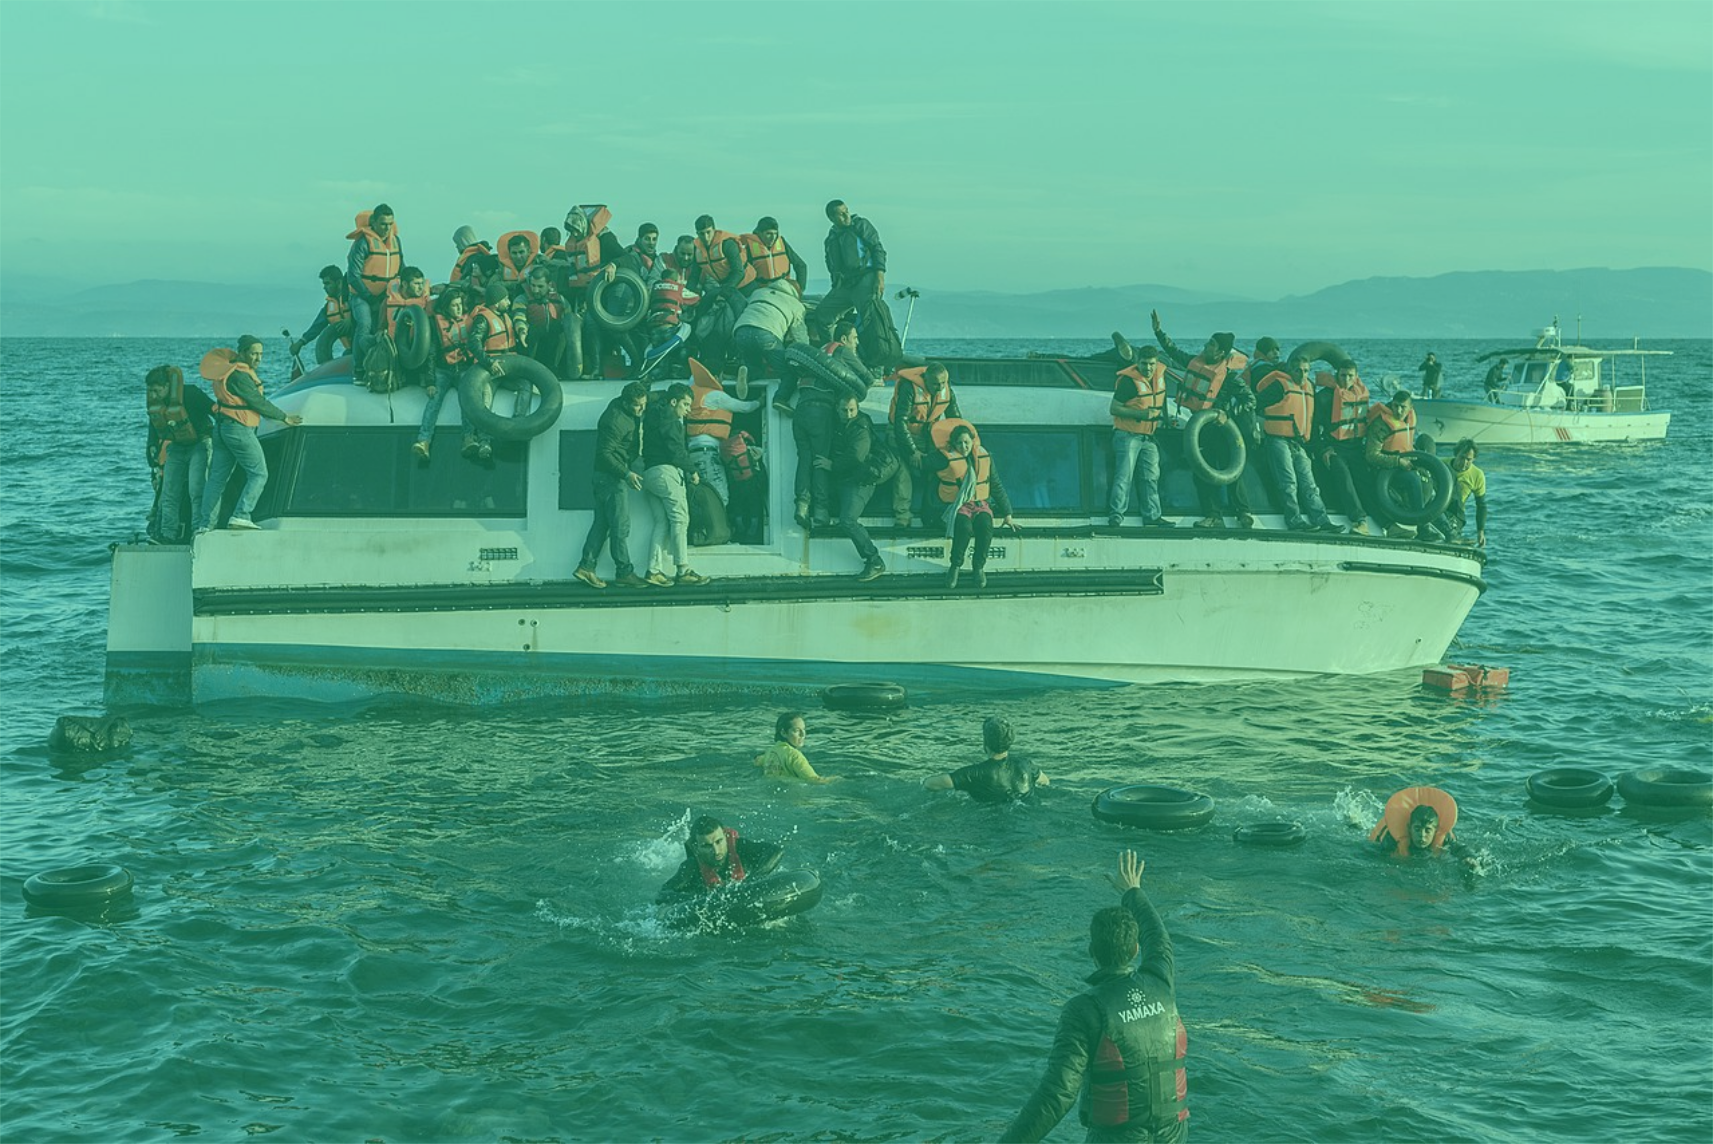 Photo: "20151030 Syrians and Iraq refugees arrive at Skala Sykamias Lesvos Greece 2", by Ggia licensed under CC BY-SA 4.0. Hue modified from the original